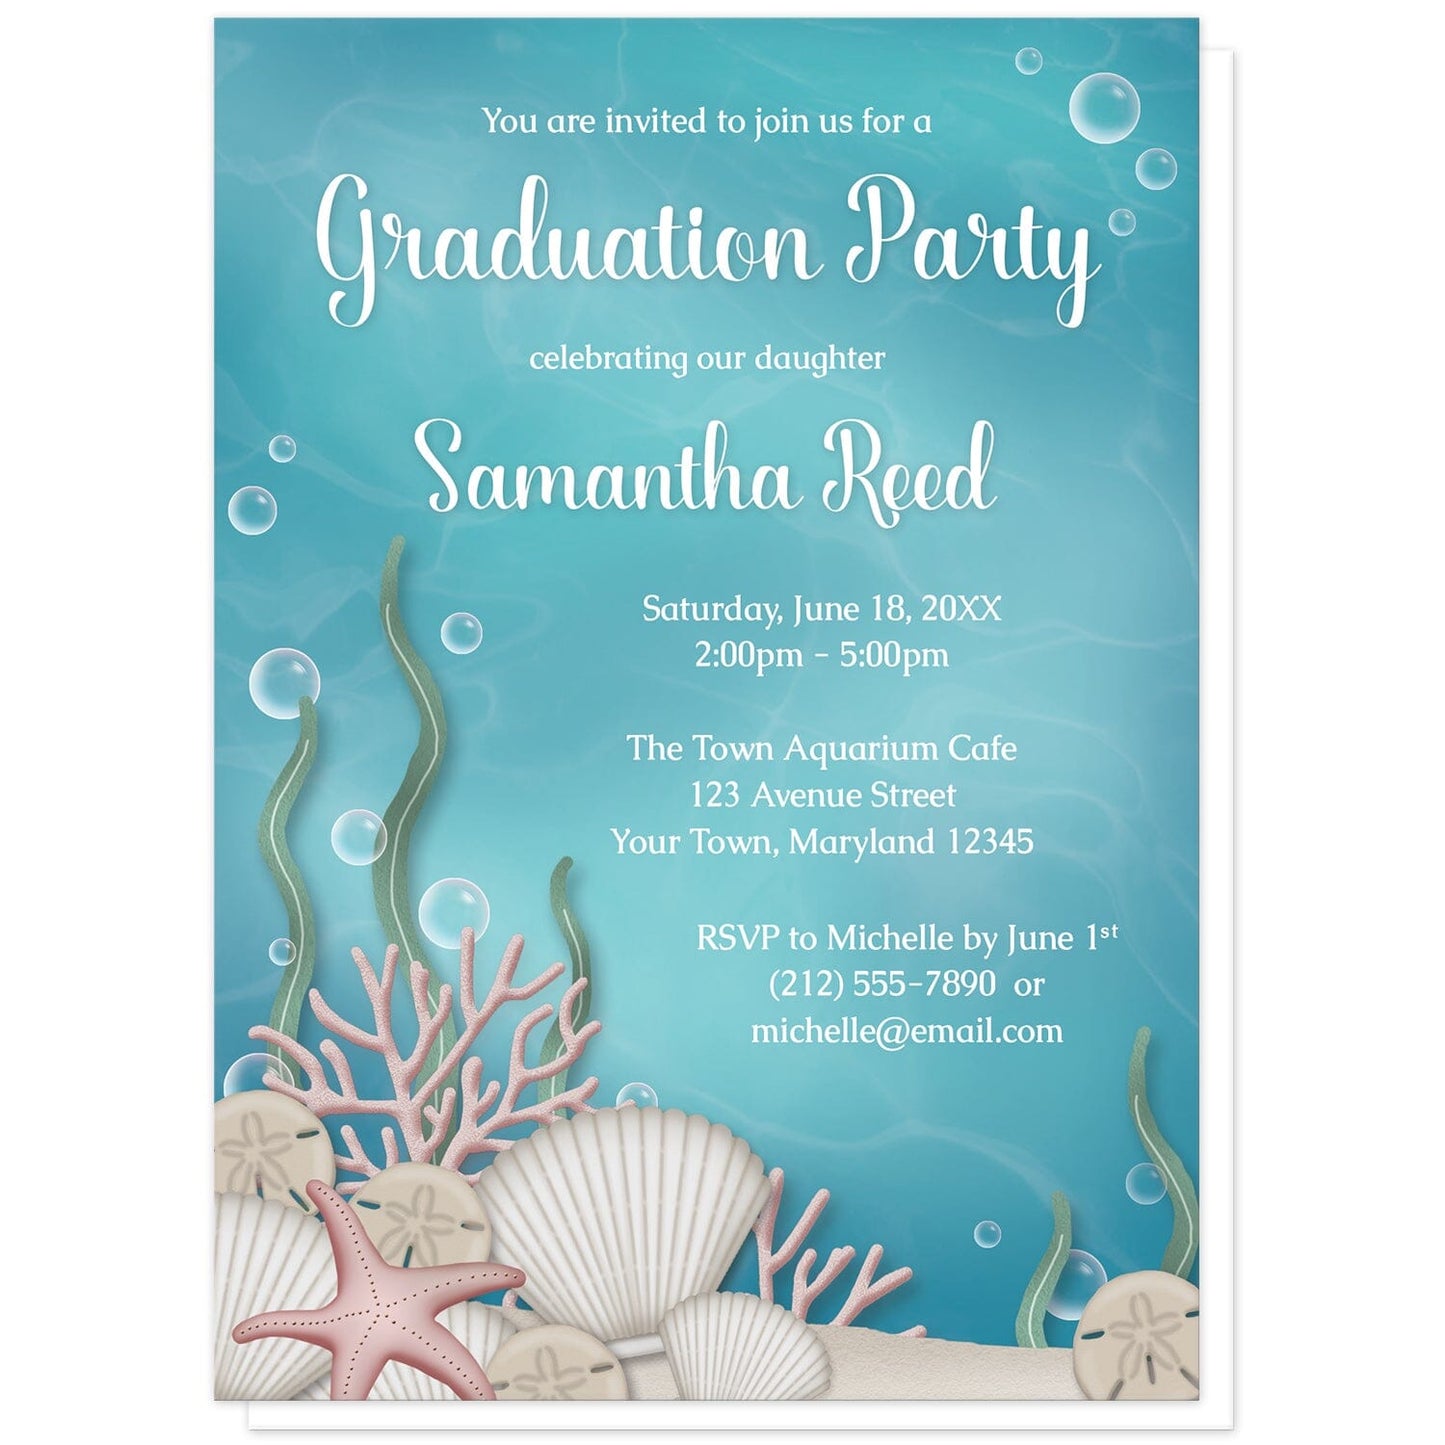 Whimsical Under the Sea Graduation Invitations at Artistically Invited. Uniquely illustrated whimsical under the sea graduation party invitations with an under the sea or aquarium theme. They are designed with a sandy seabed, assorted seashells, coral, kelp, and whimsical bubbles. Your personalized graduation party details are custom printed in white over the aqua blue underwater background.